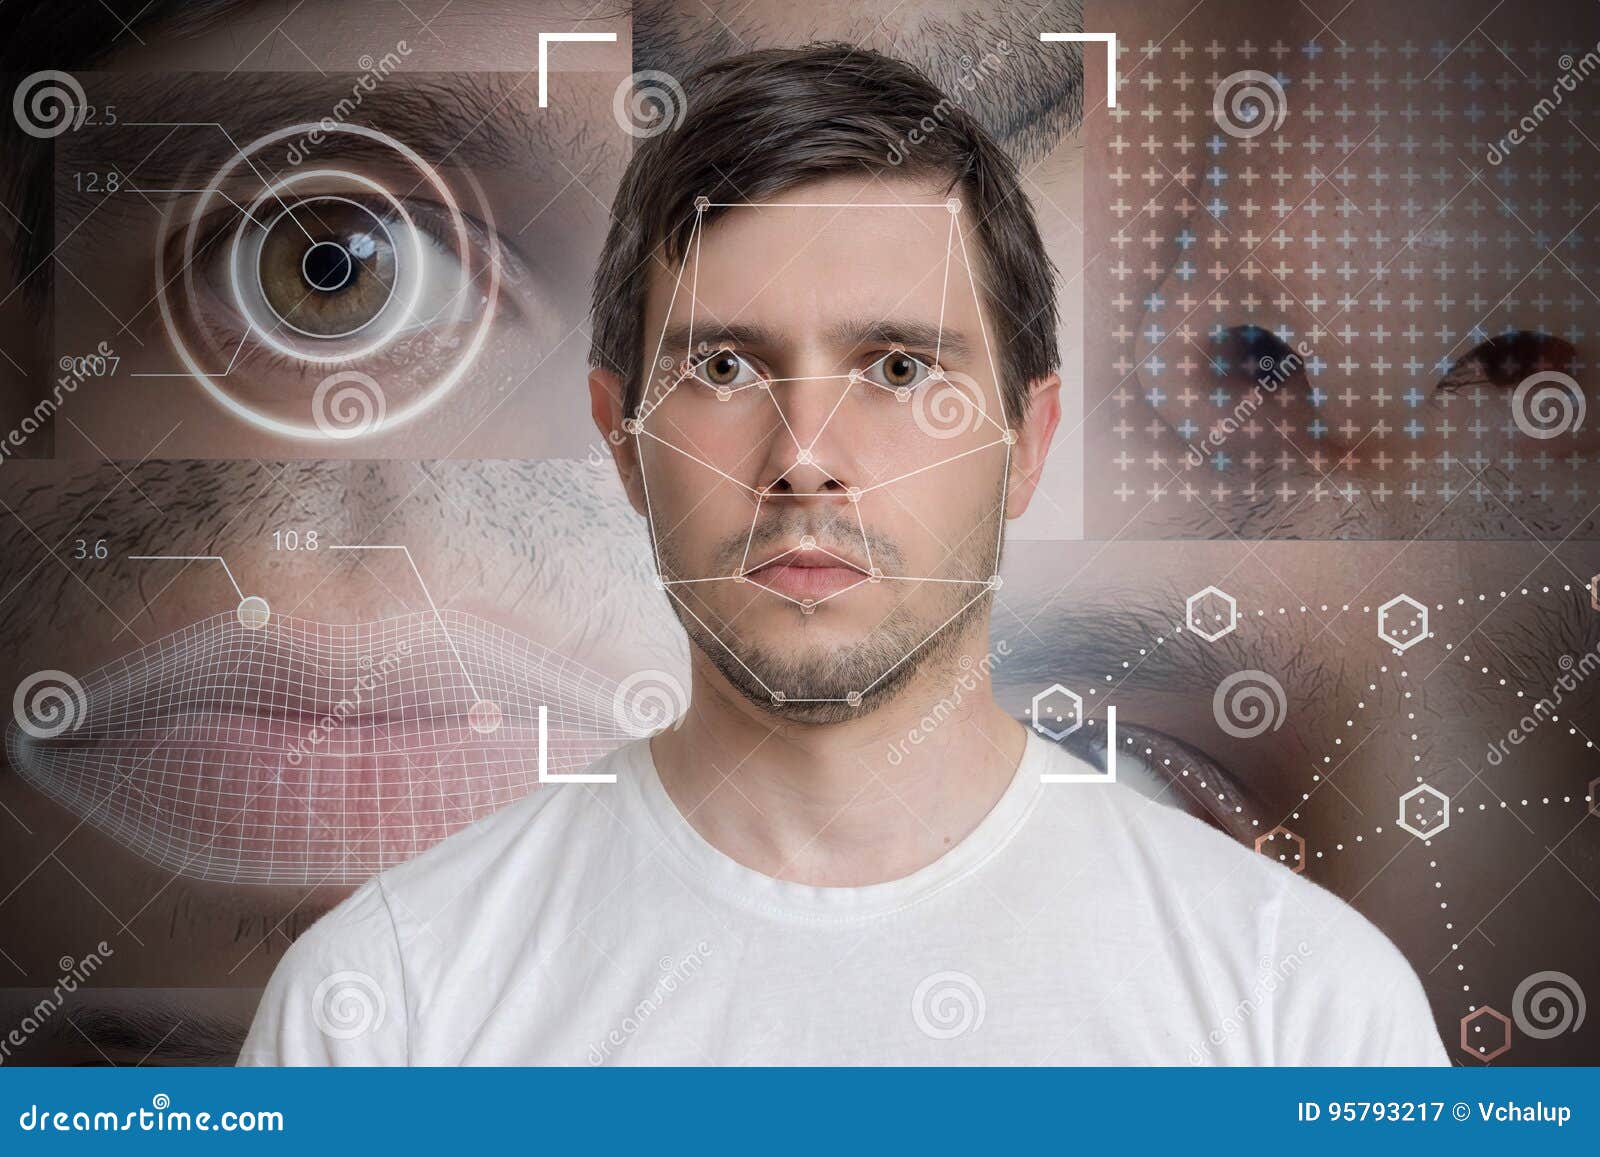 face detection and recognition of man. computer vision and machine learning concept